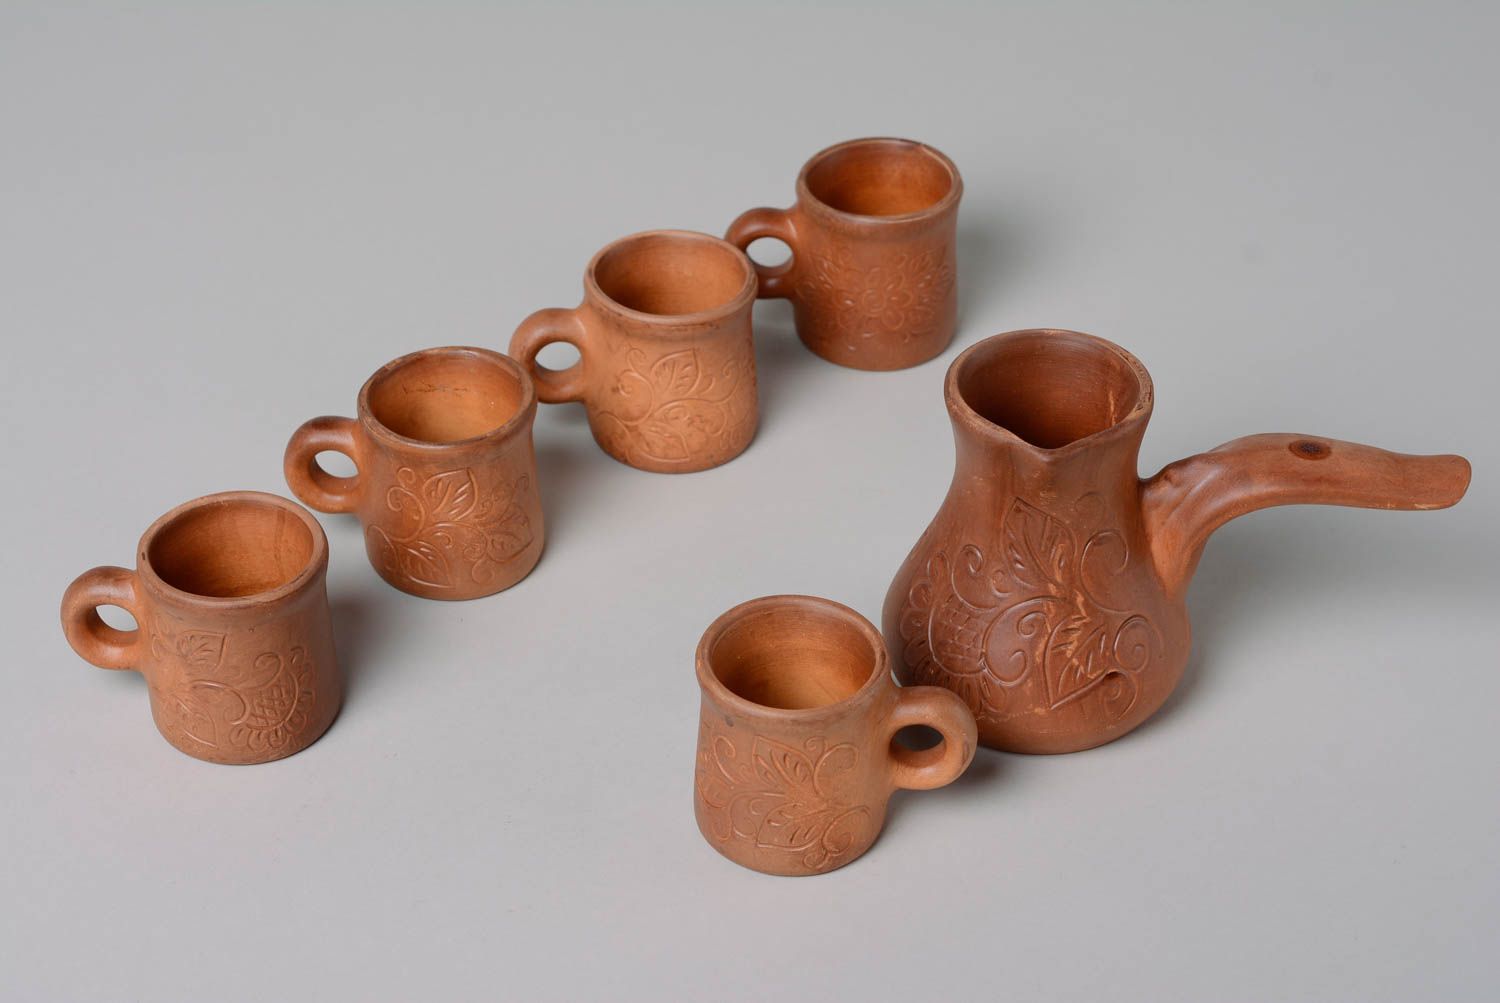 Handmade coffee set made of clay with ceramic kettle and 5 coffee cups with handle 2,19 lb photo 1